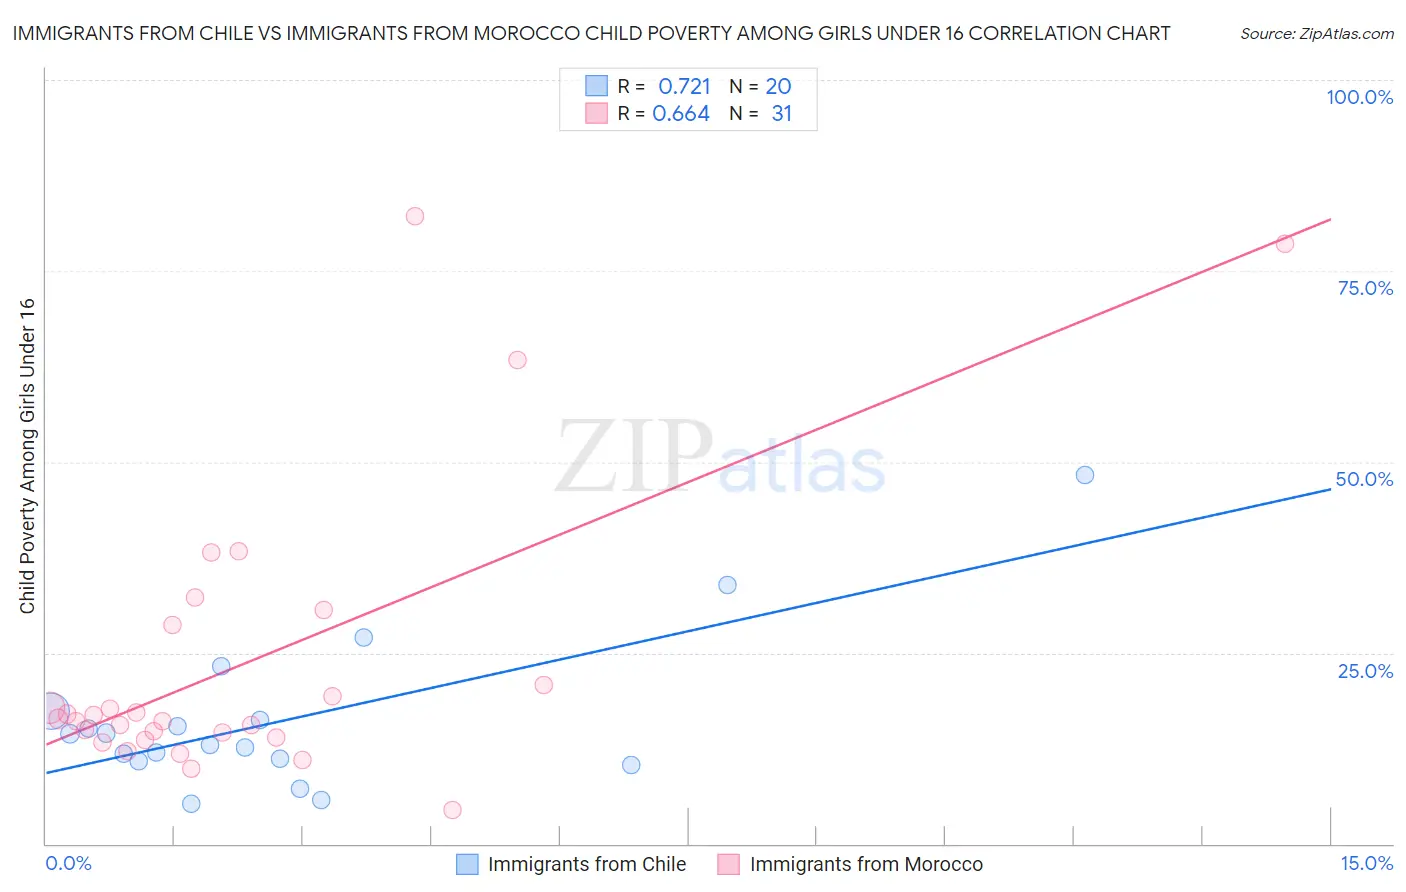 Immigrants from Chile vs Immigrants from Morocco Child Poverty Among Girls Under 16